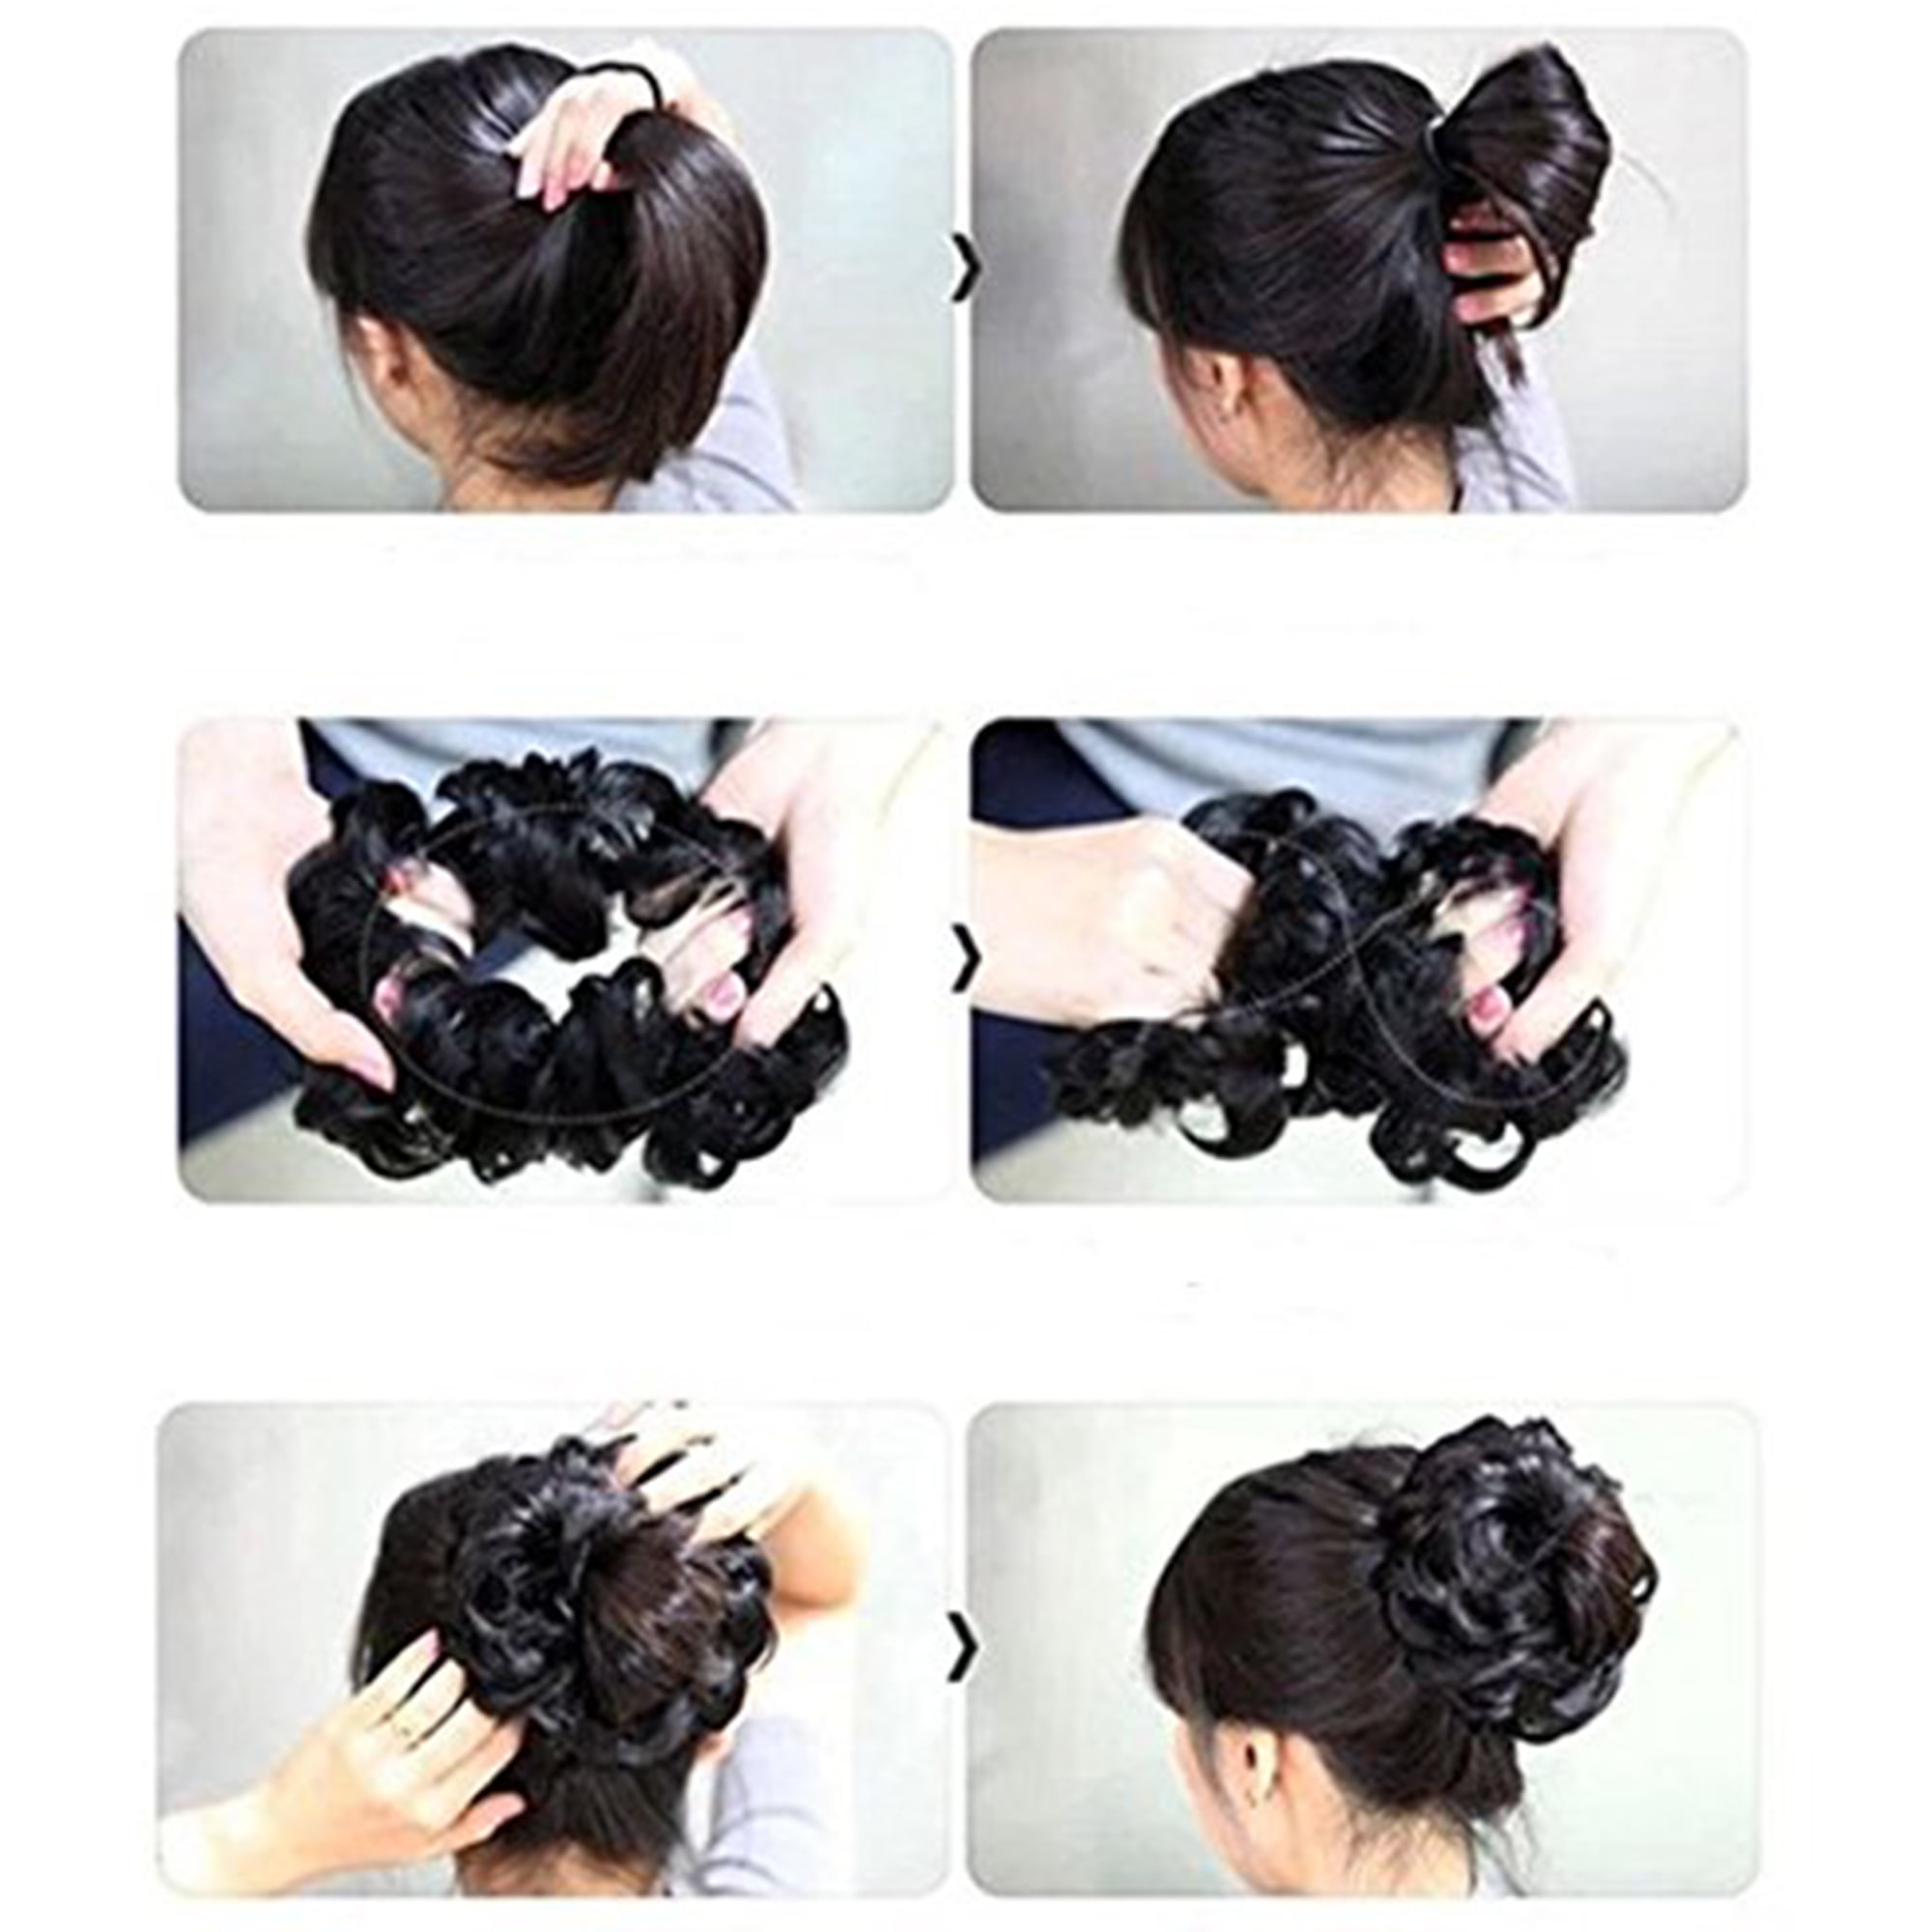 Elegant and Easy Hair Bun Ideas for Women | American Beauty College